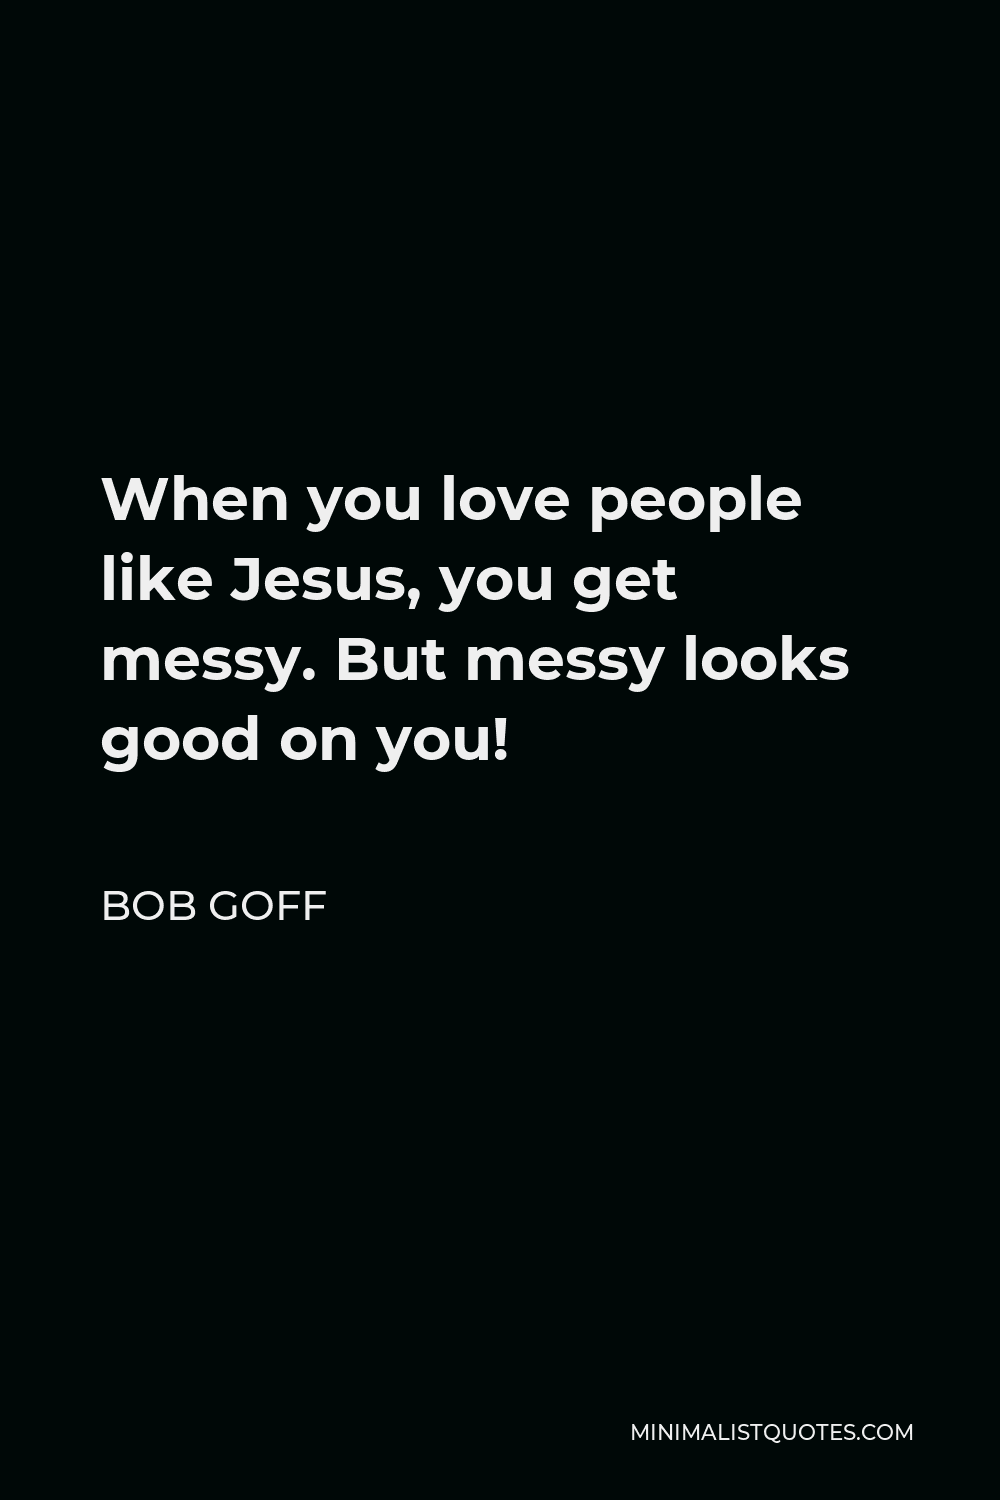 Bob Goff Quote - When you love people like Jesus, you get messy. But messy looks good on you!